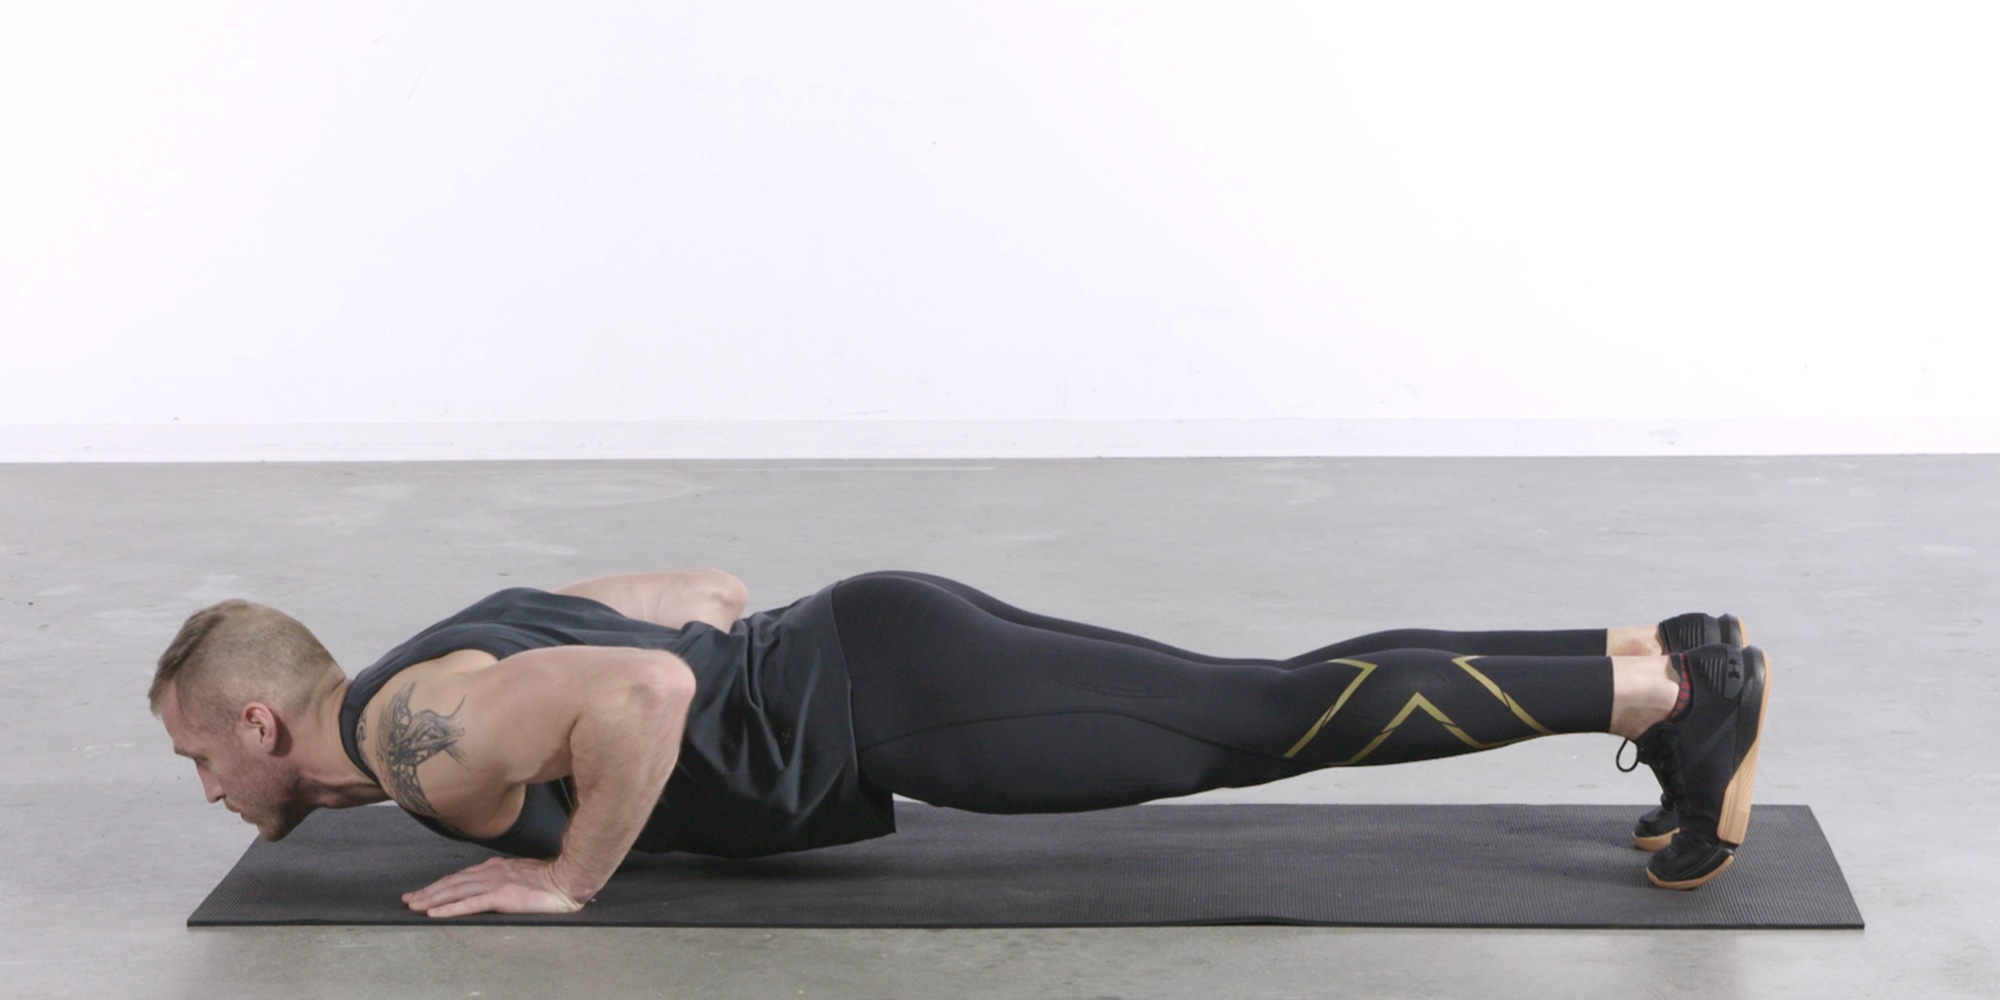 Push-Ups: Get Killer Results with Perfect Push-Up Form